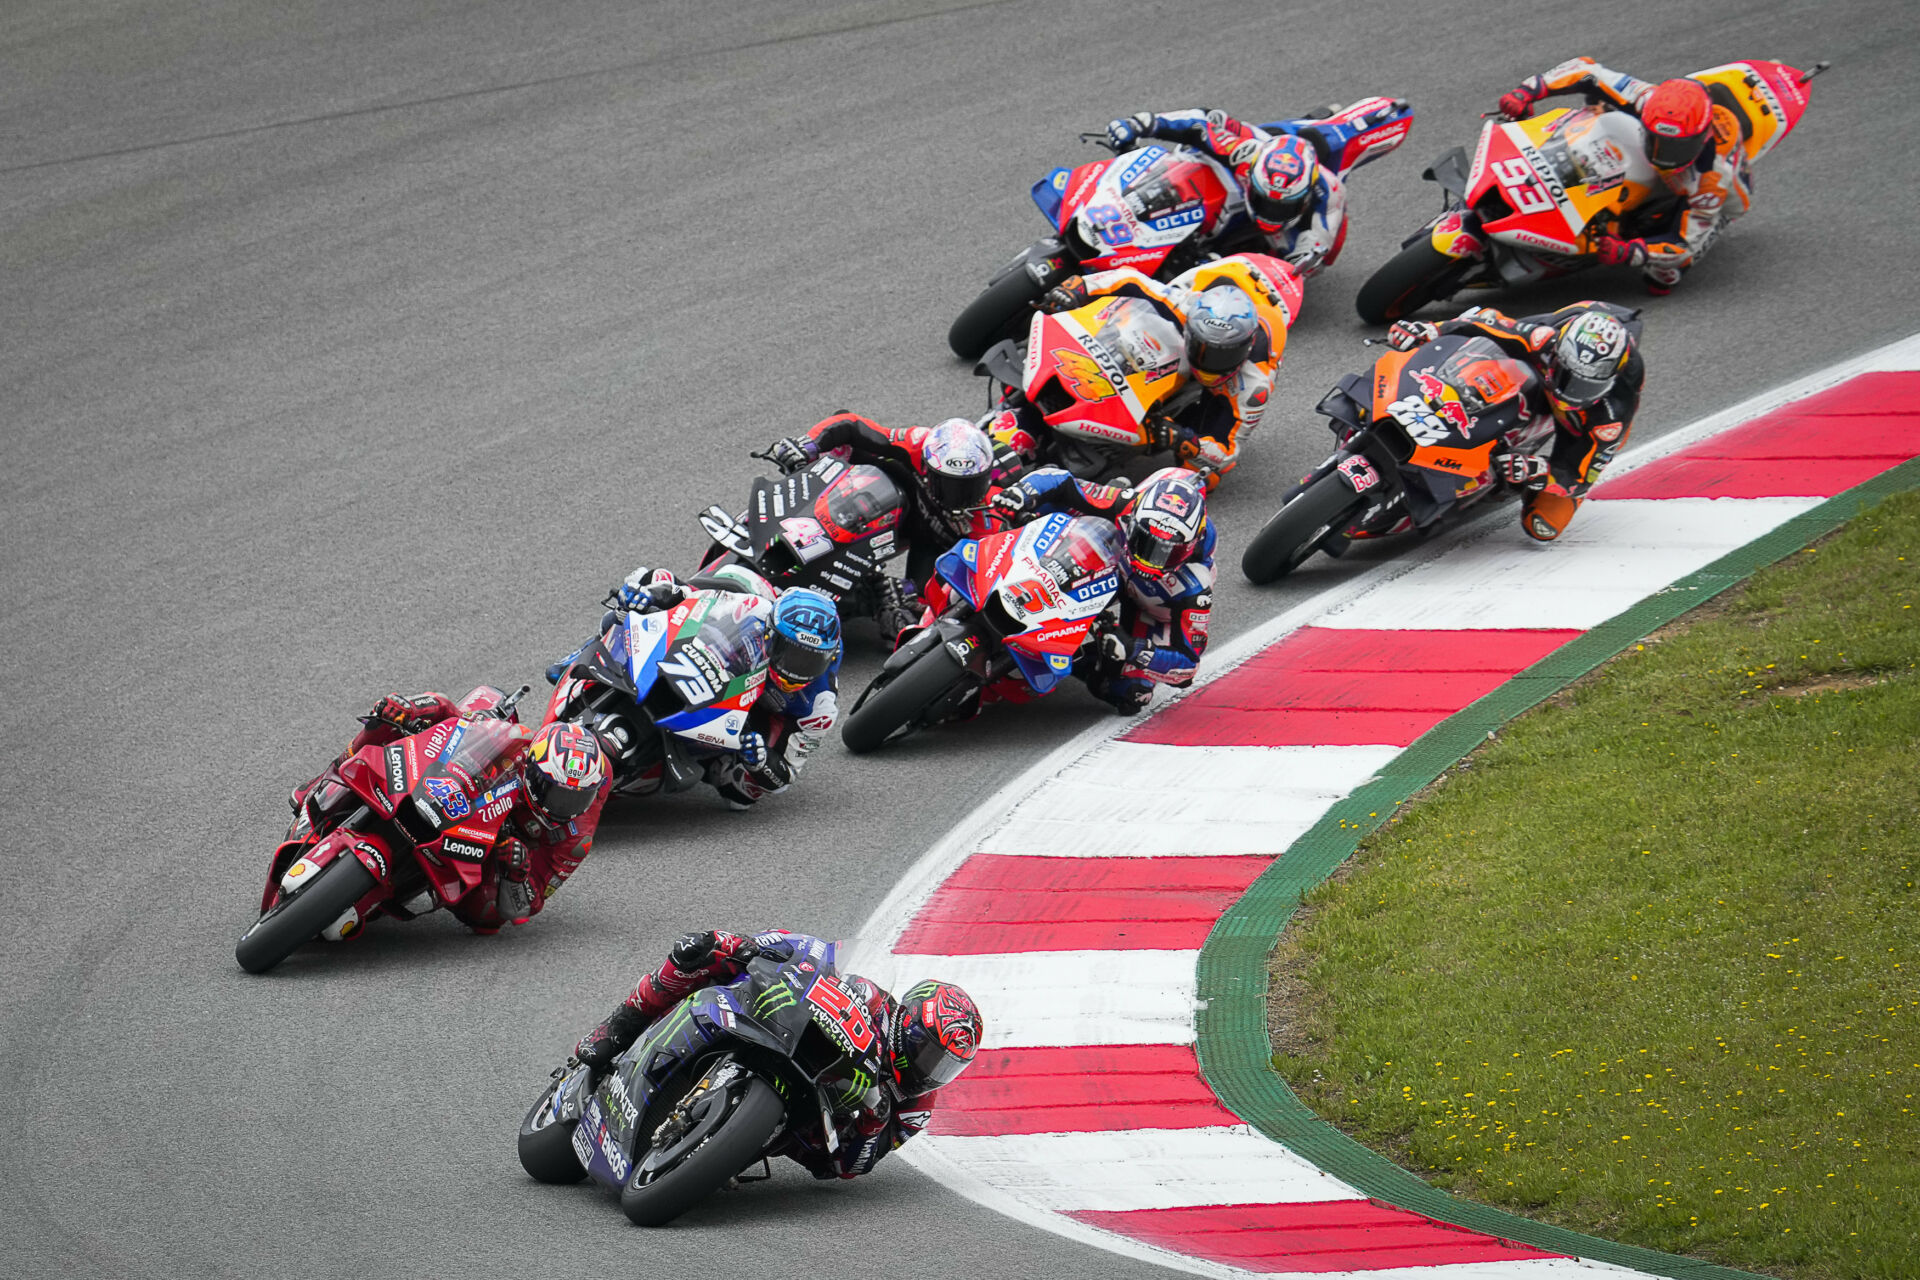 Action from the MotoGP race in Portugal in 2022 with Fabio Quartararo (20) leading a group of riders. Photo courtesy Dorna.